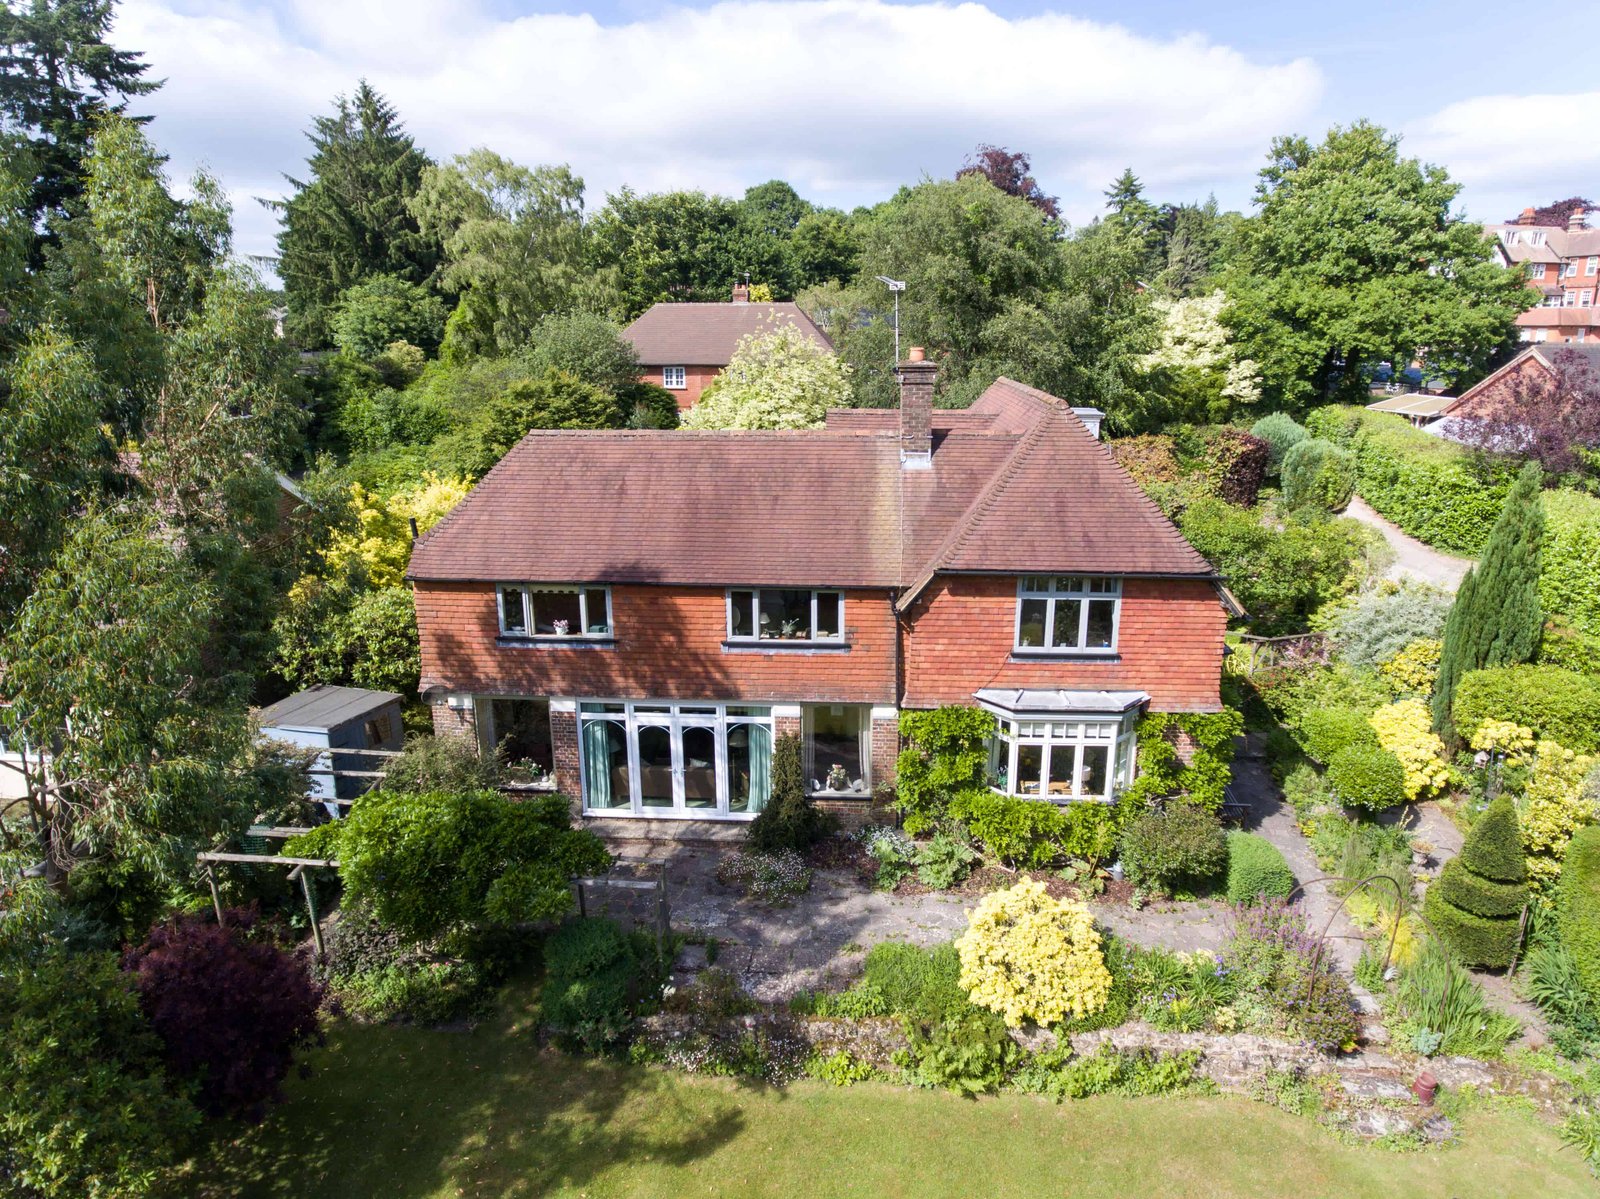 Exterior drone picture of a property in Hampshire, UK